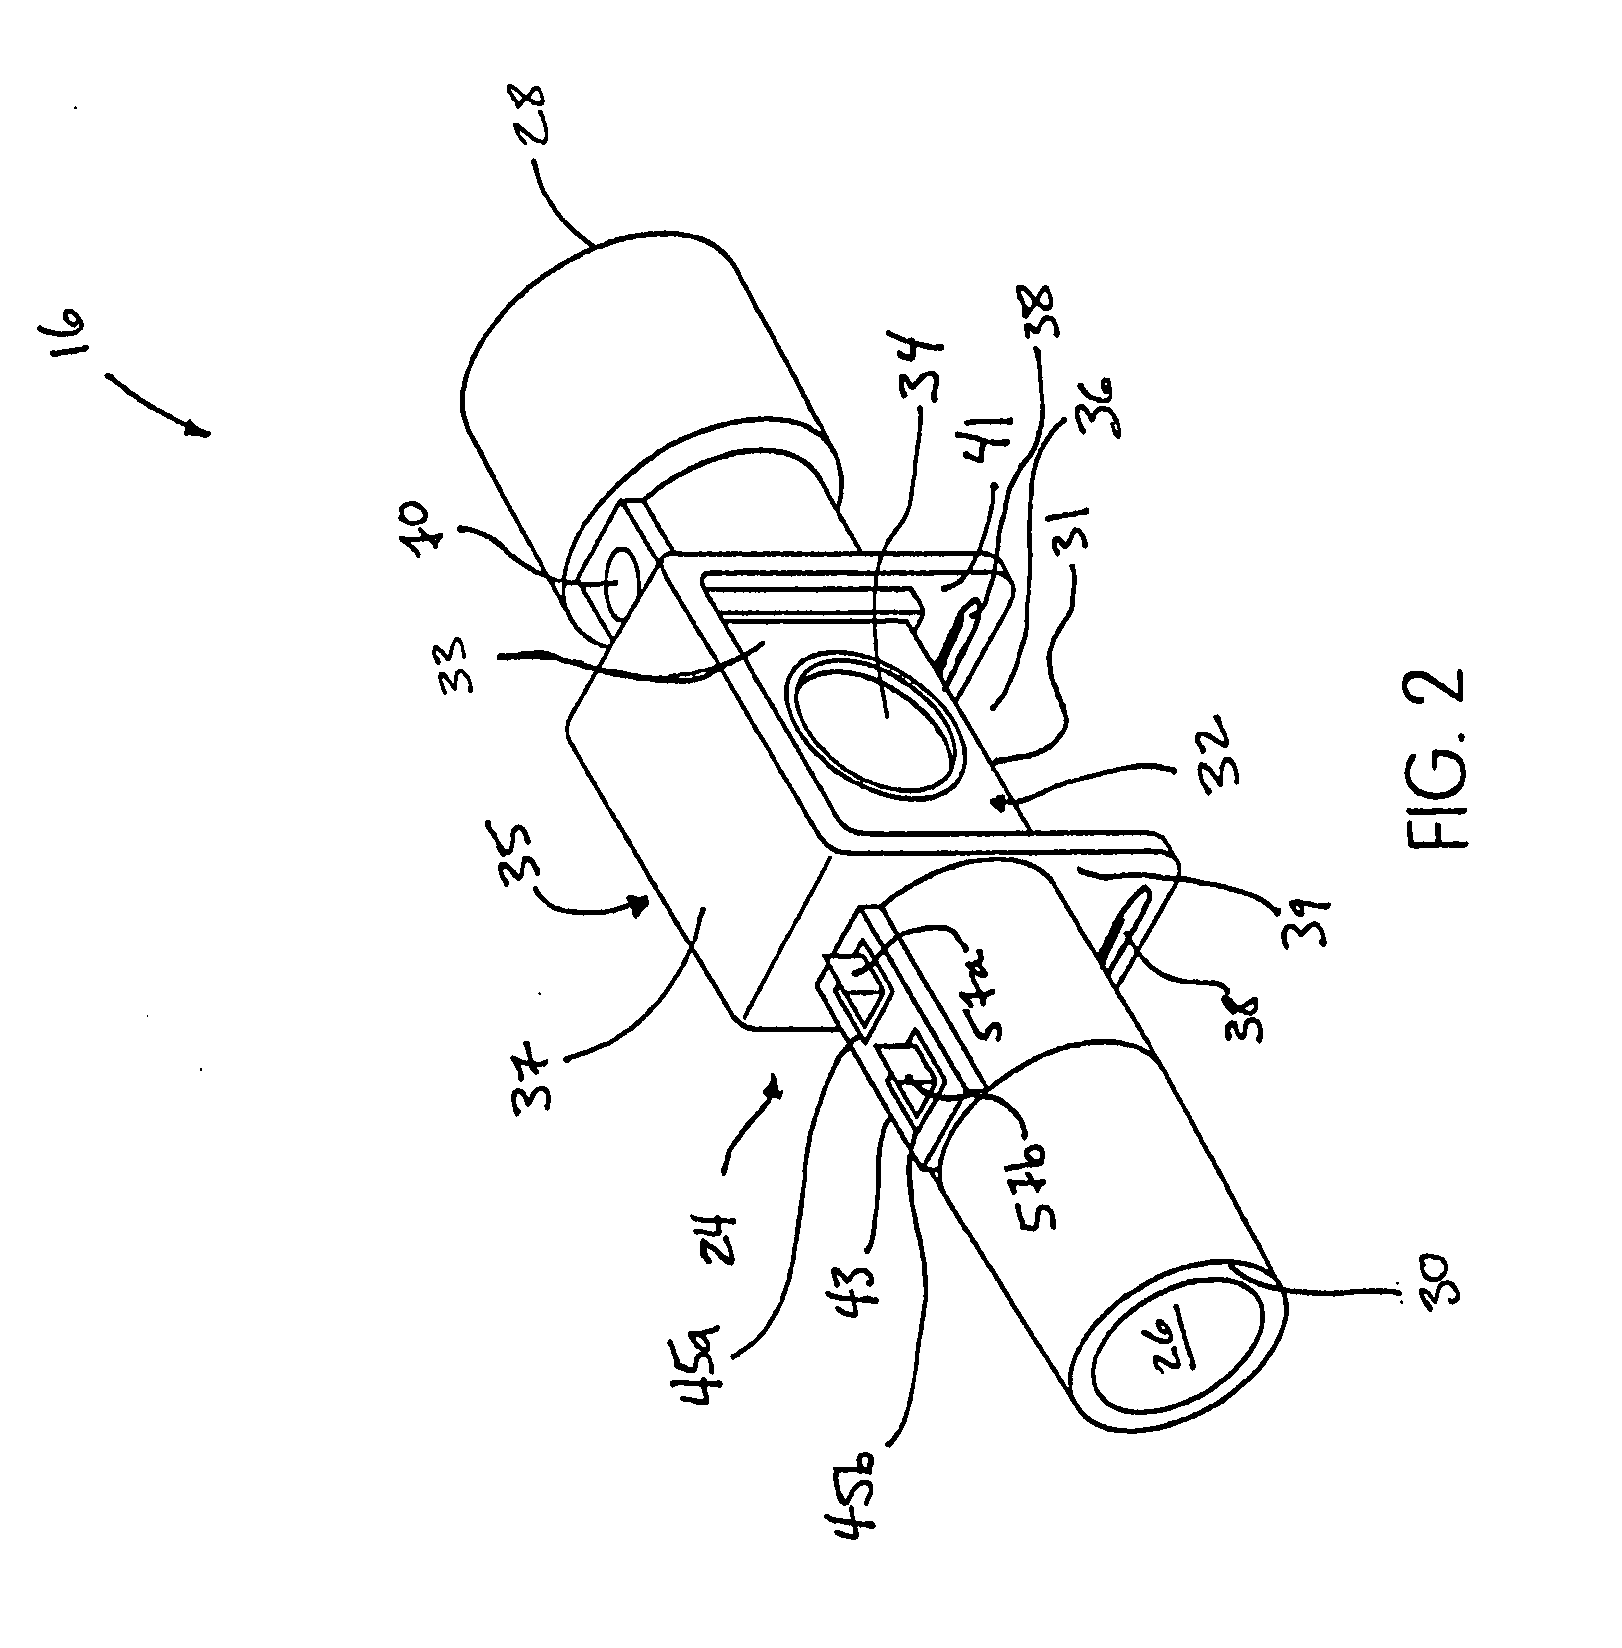 Airway adaptor with optical pressure transducer and method of manufacturing a sensor component